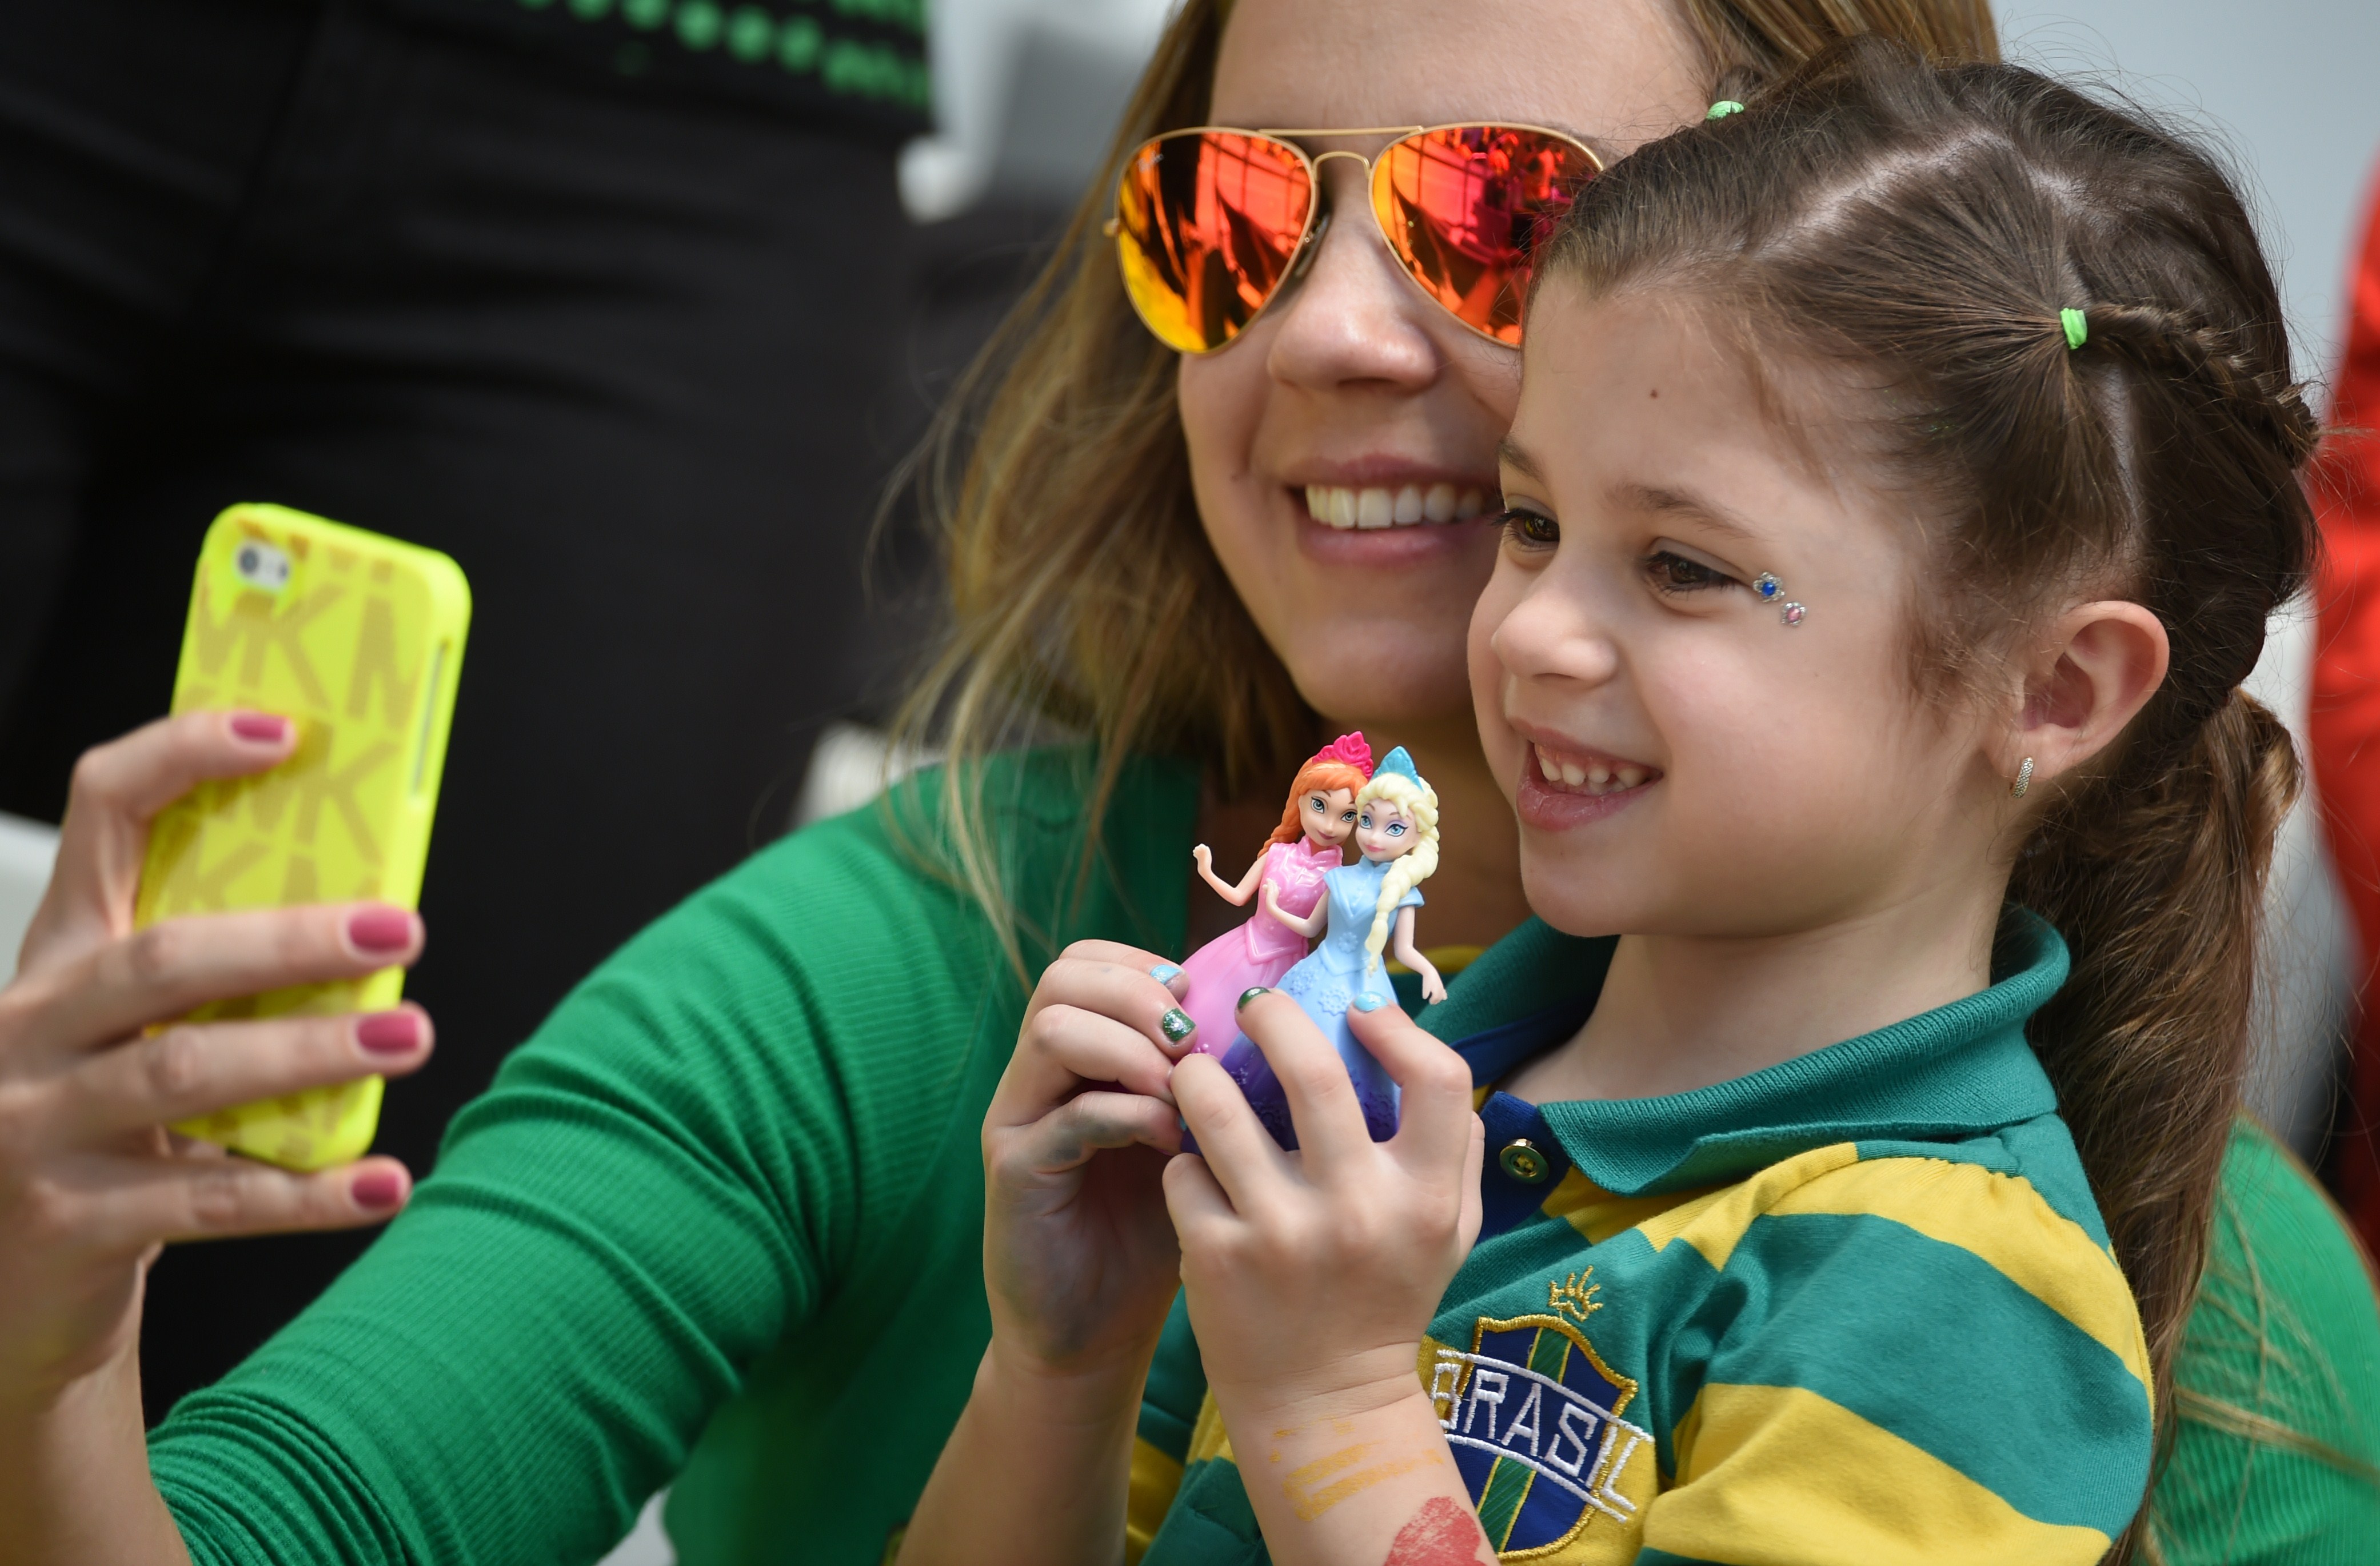 Australian fans take a picture with a smartphone before a Group B football match between Australia and Spain at the Baixada Arena in Curitiba during the 2014 FIFA World Cup on June 23, 2014.